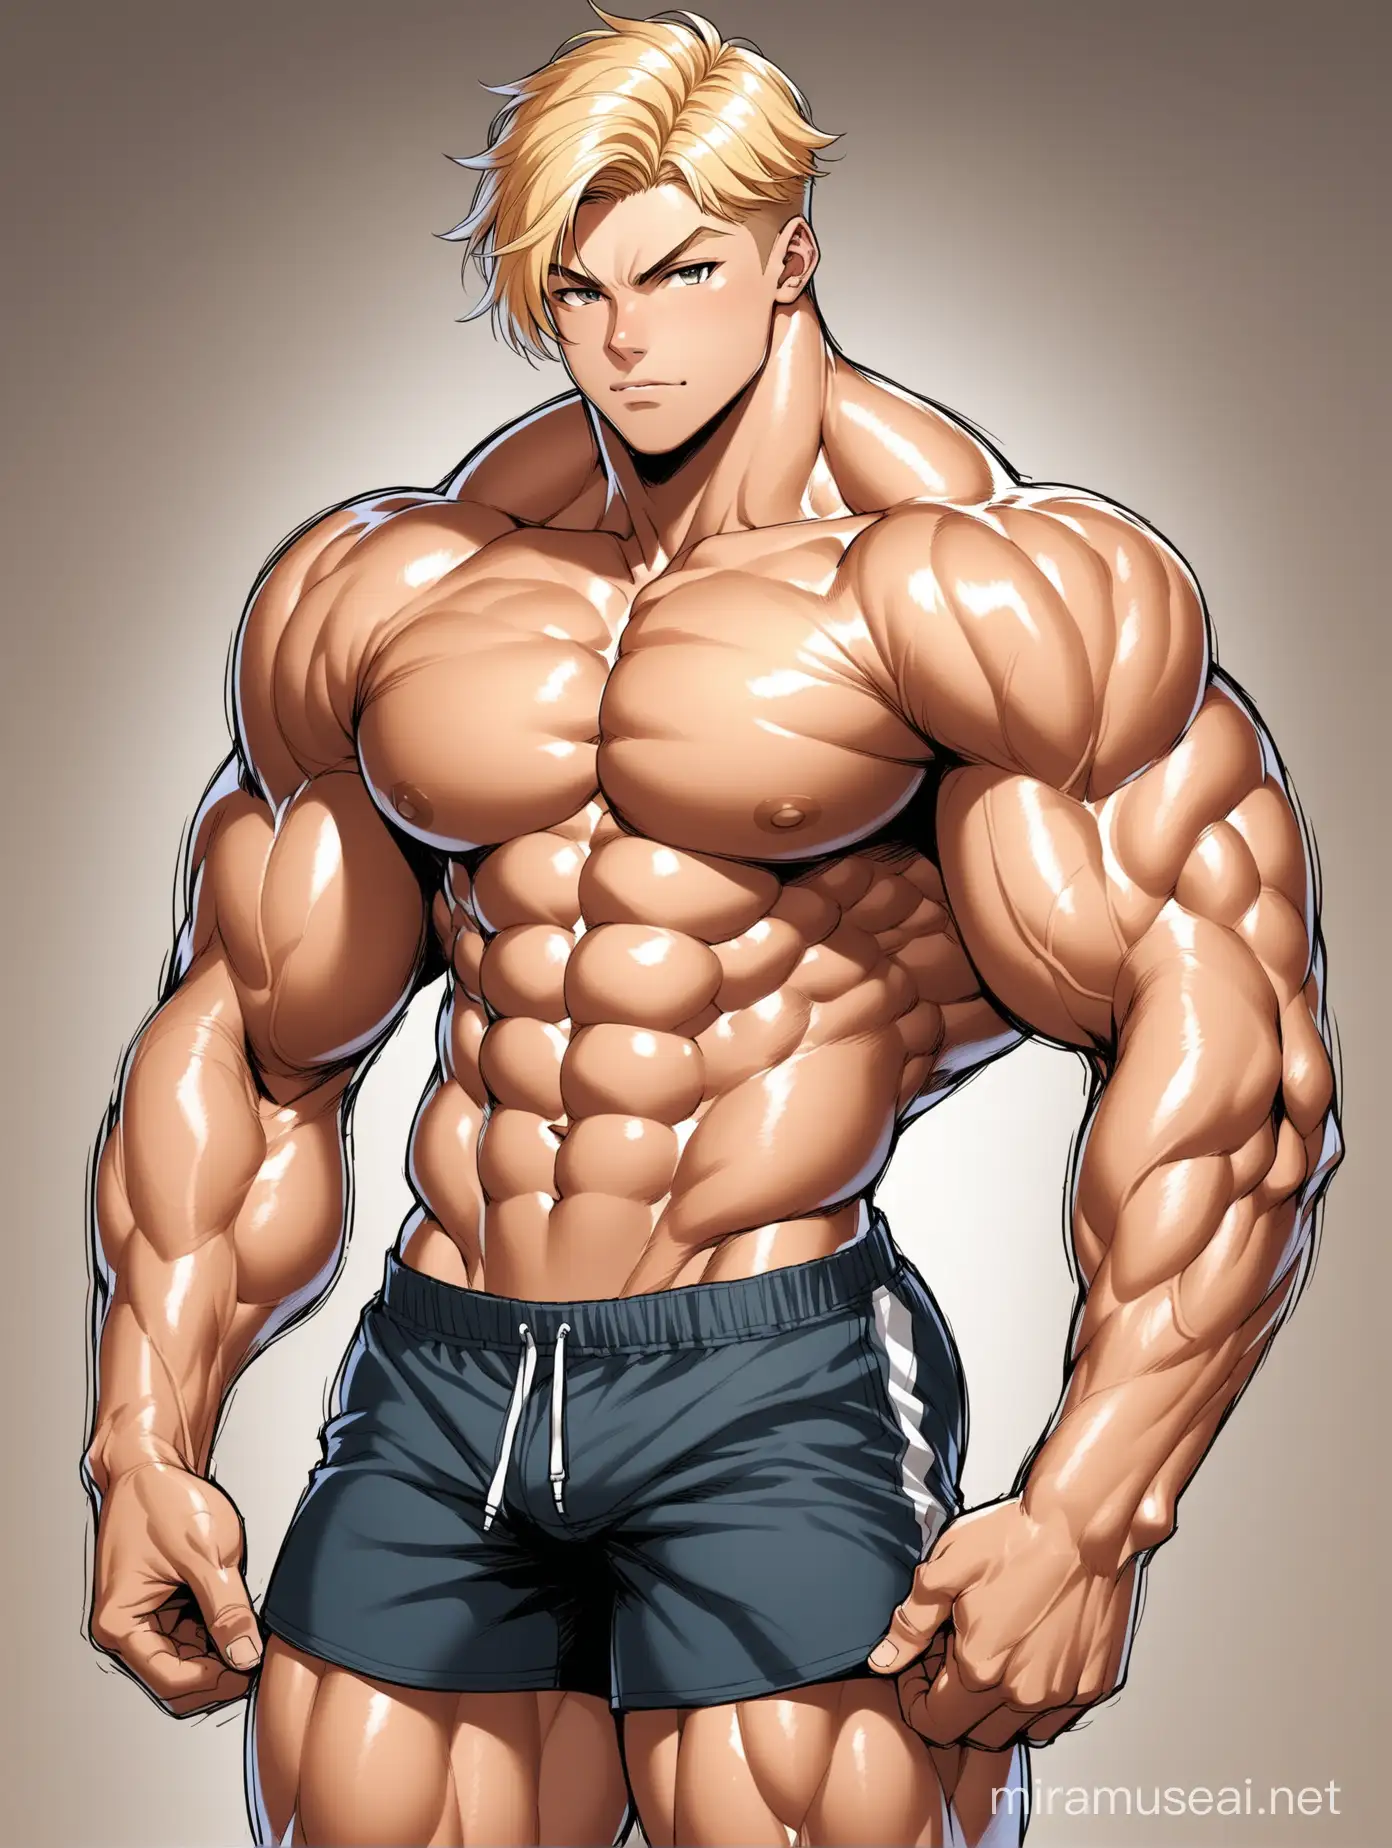 Striking Portrait of a Muscular Teenage Male with Blonde Hair and Powerful Physique